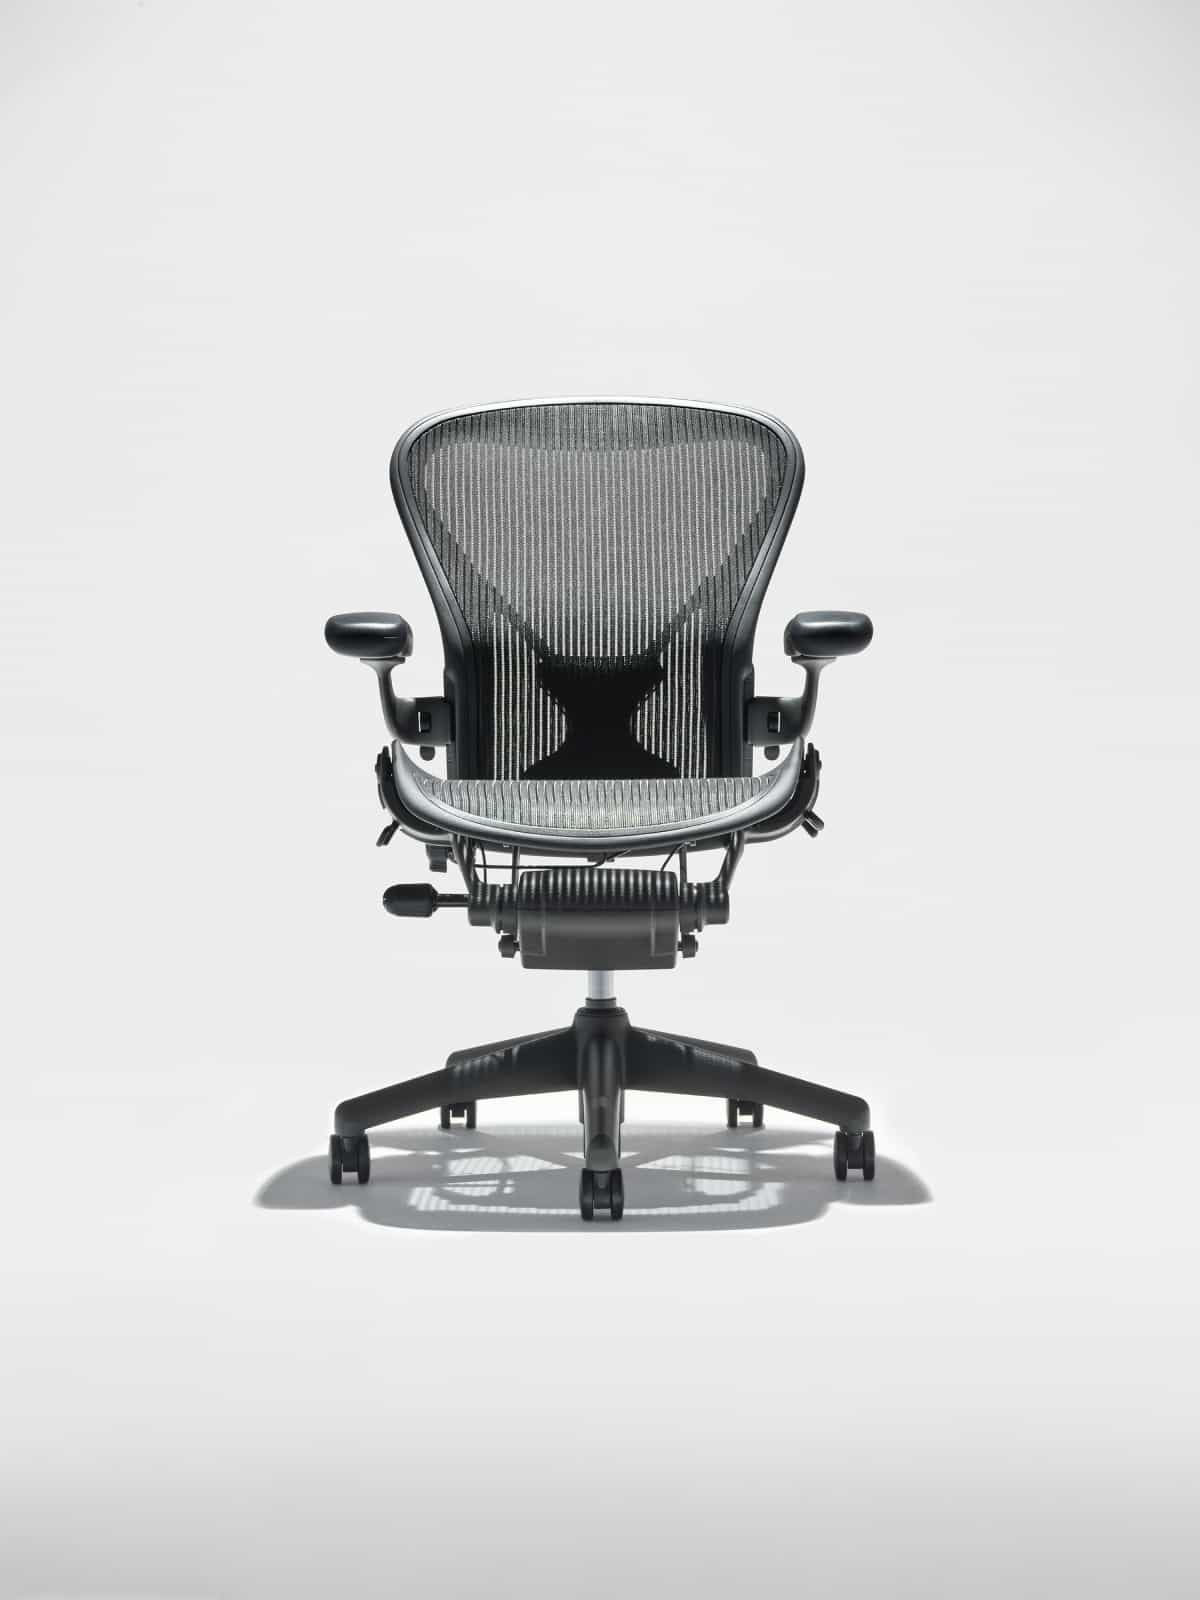 A front view of a black Aeron Chair on white background.